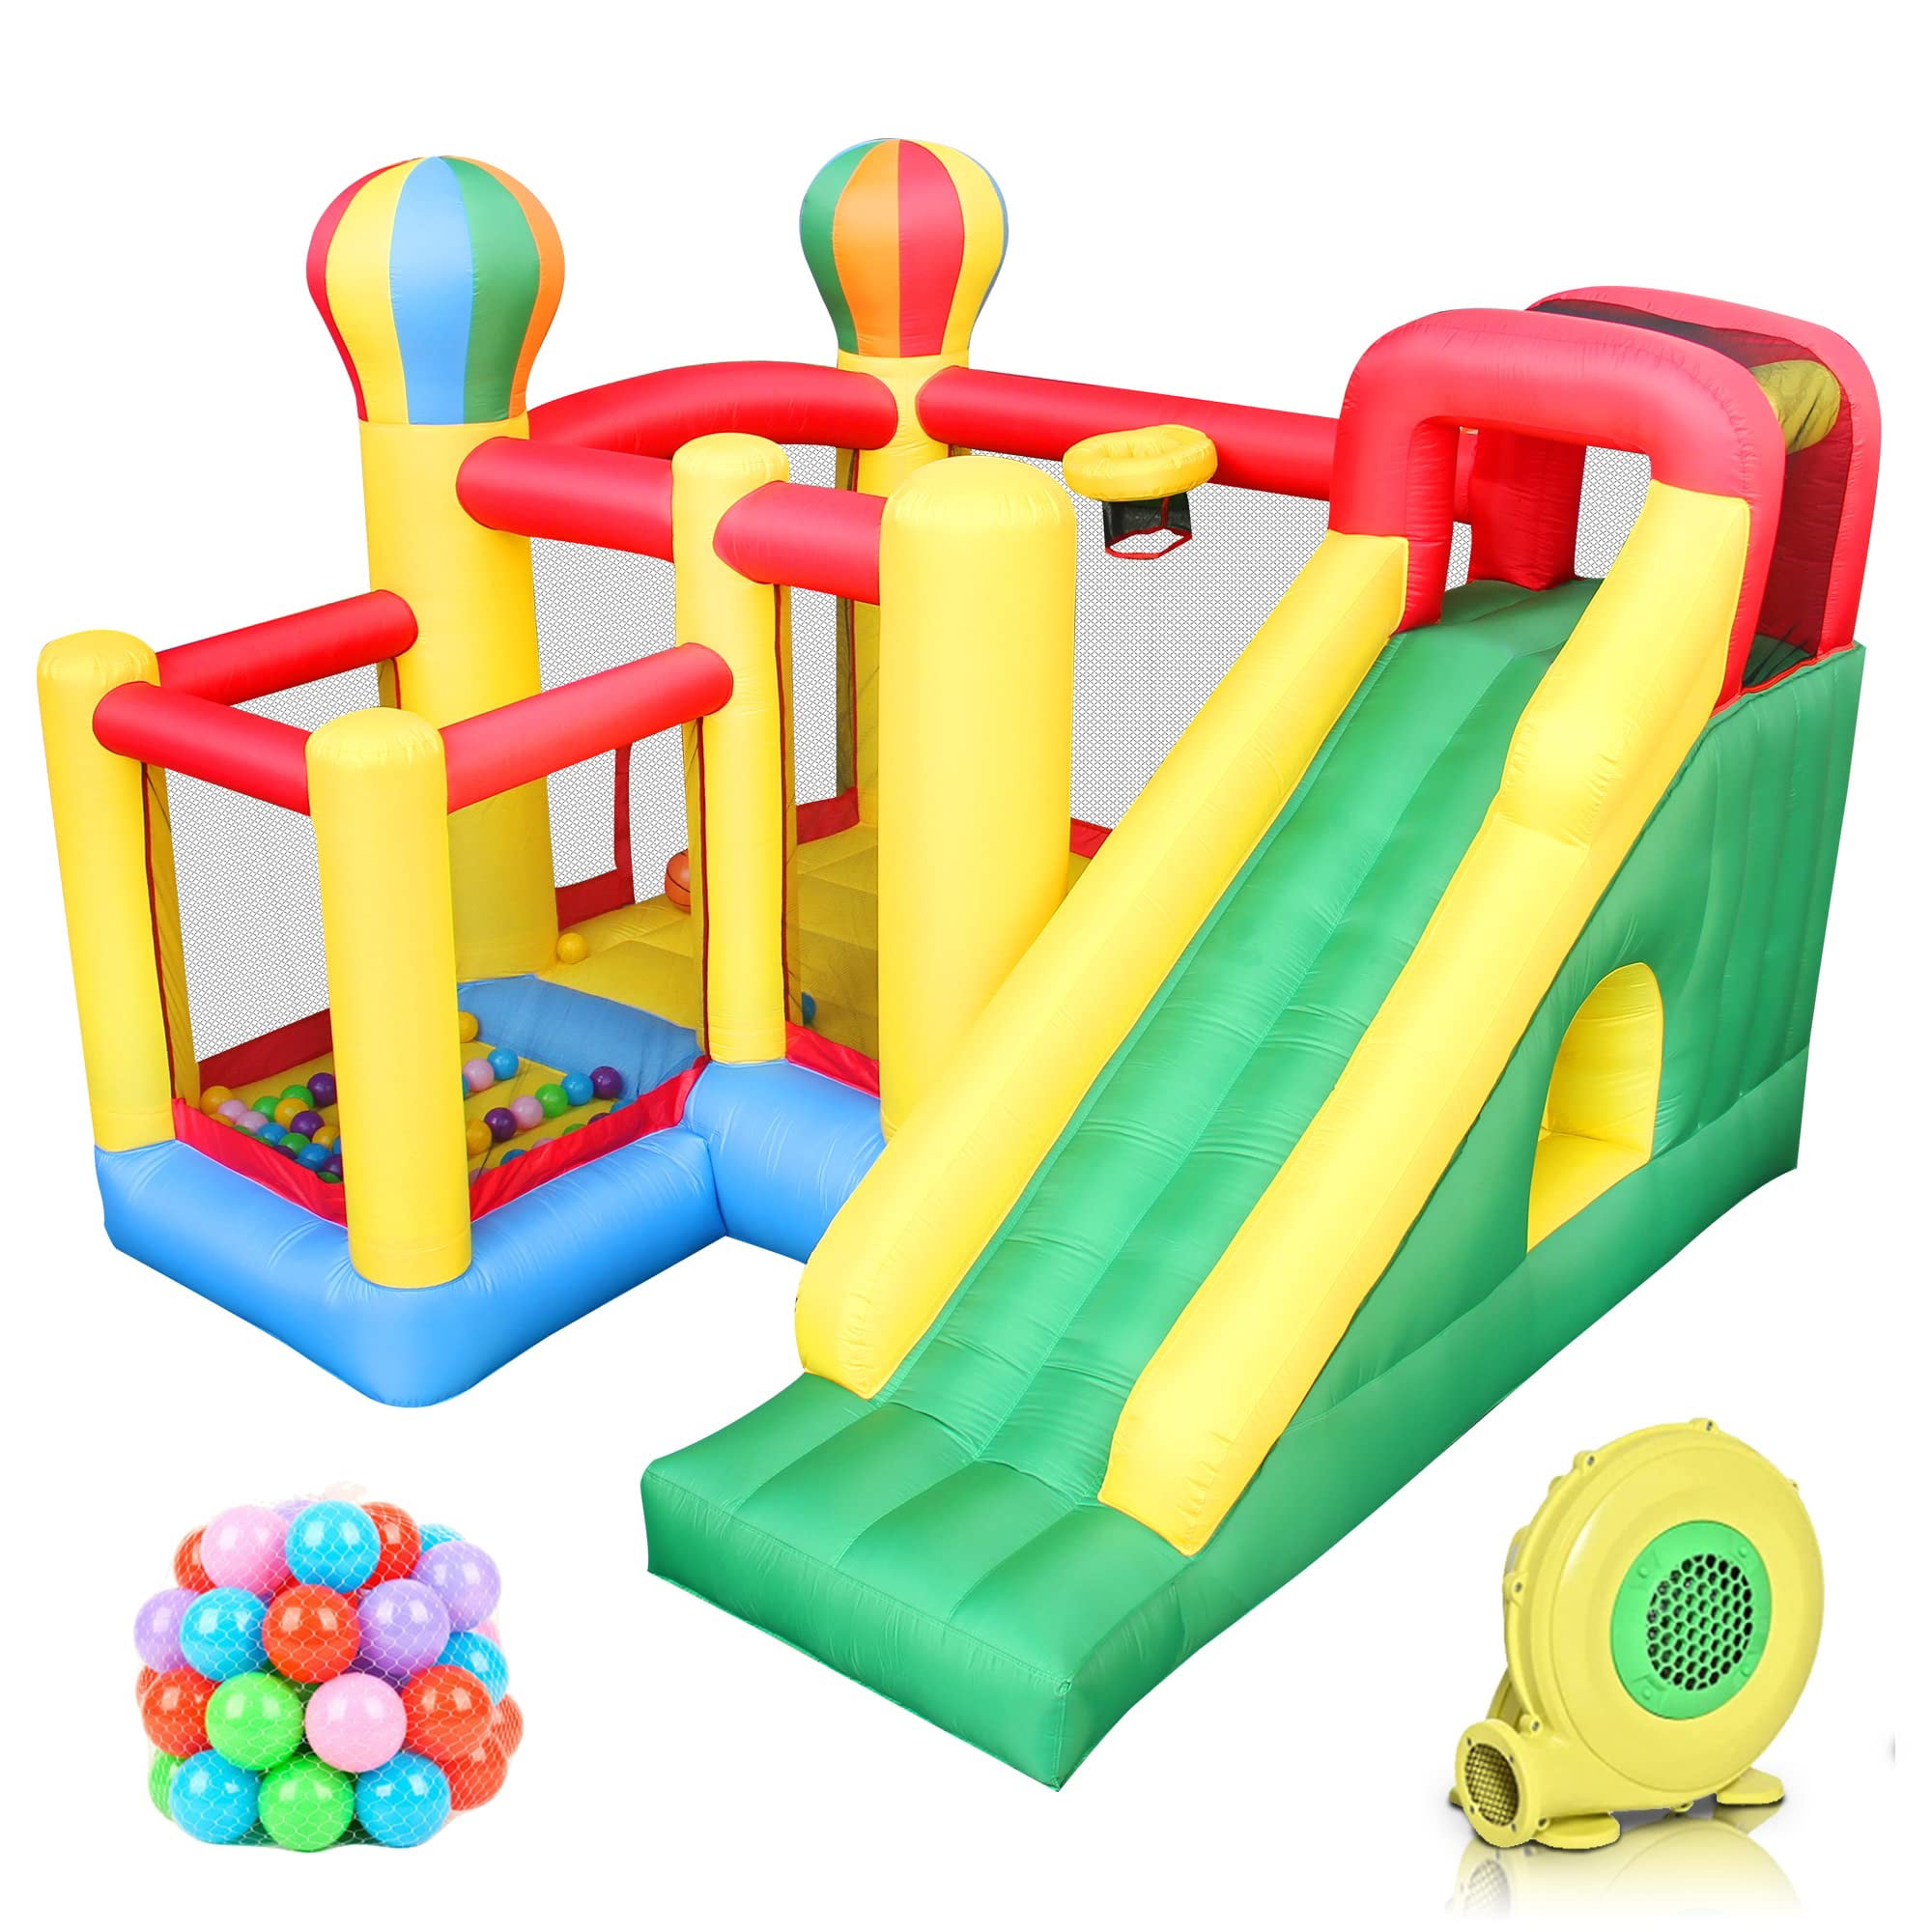 BESTPARTY Inflatable Bouncers Slide Jumping Climbing Balloon 6 in 1 Playhouse with Blower 